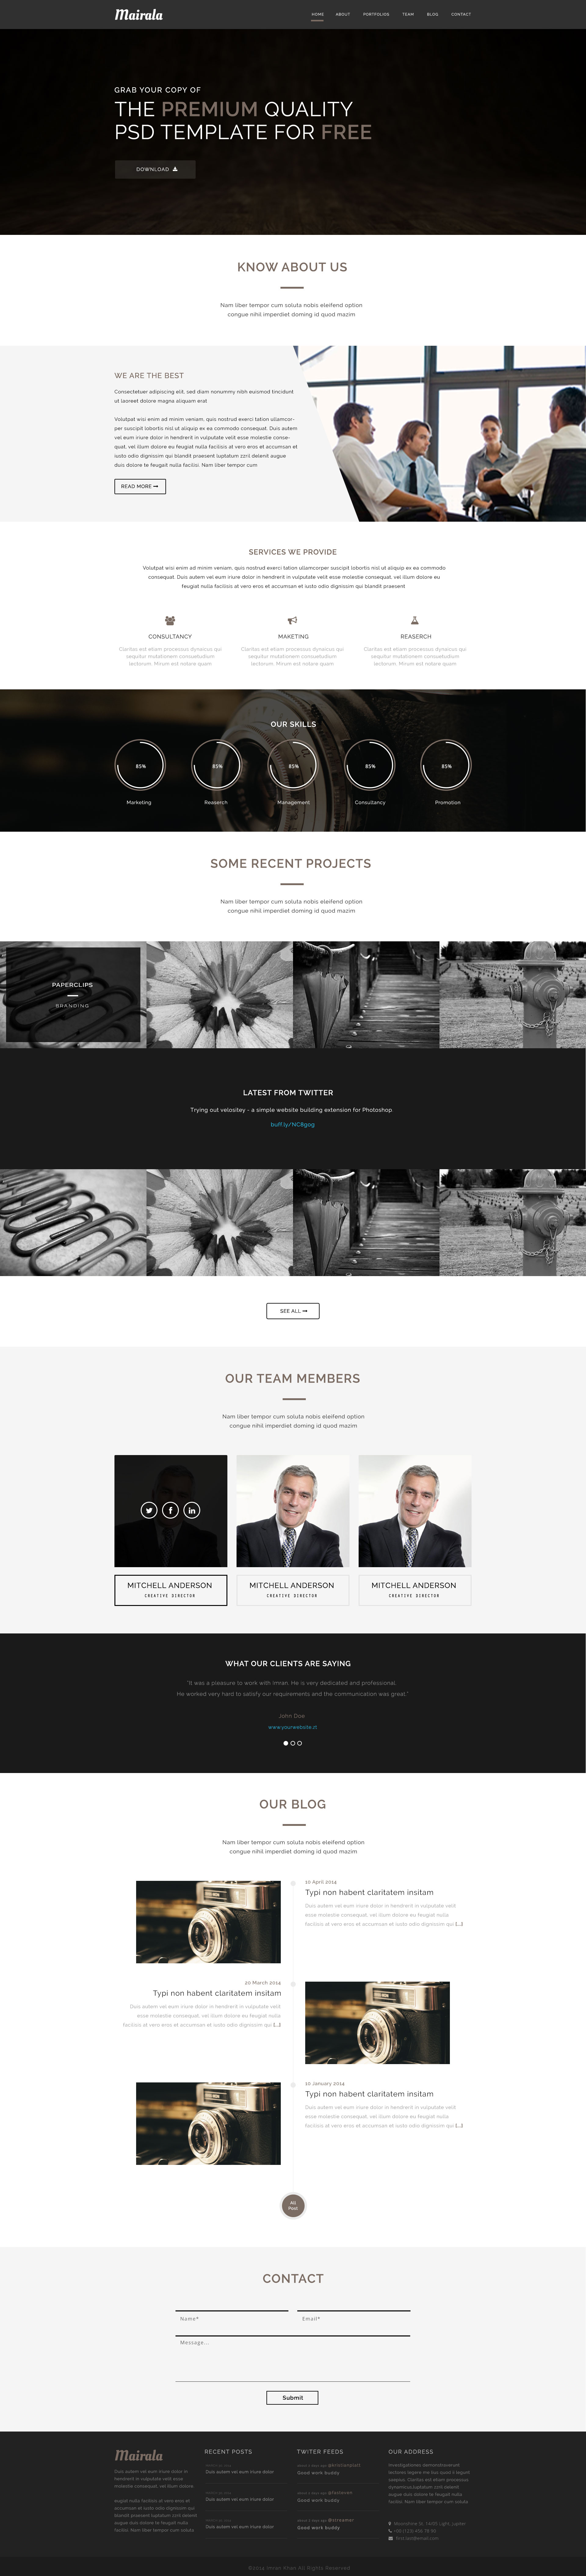 Free One Page Corporate Agency PSD Template-Mairala